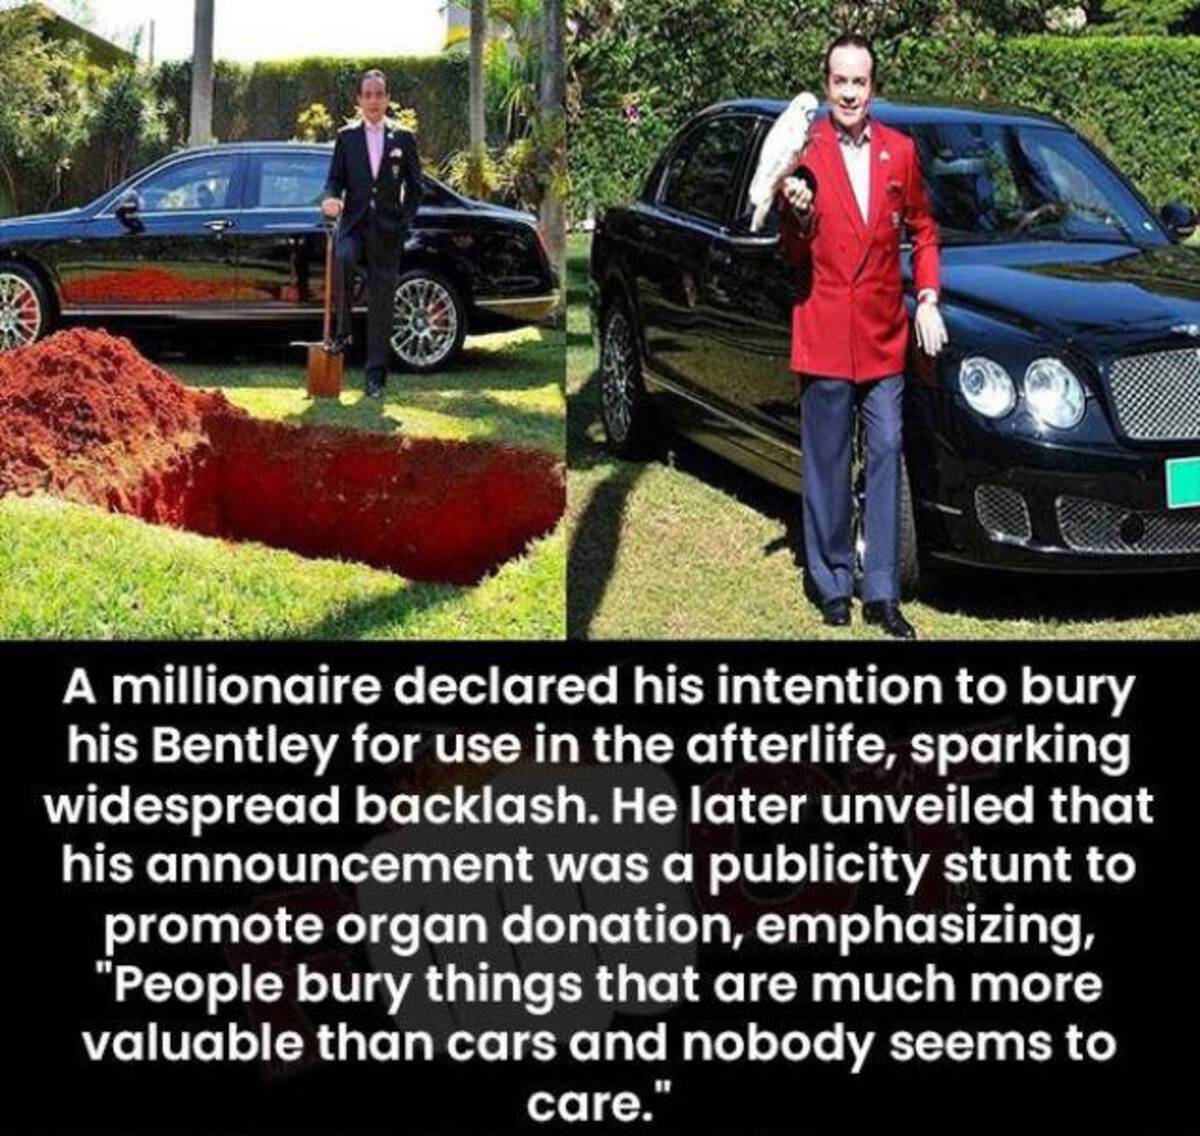 A millionaire declared his intention to bury his Bentley for use in the afterlife, sparking widespread backlash. He later unveiled that his announcement was a publicity stunt to promote organ donation, emphasizing, "People bury things that are much more…